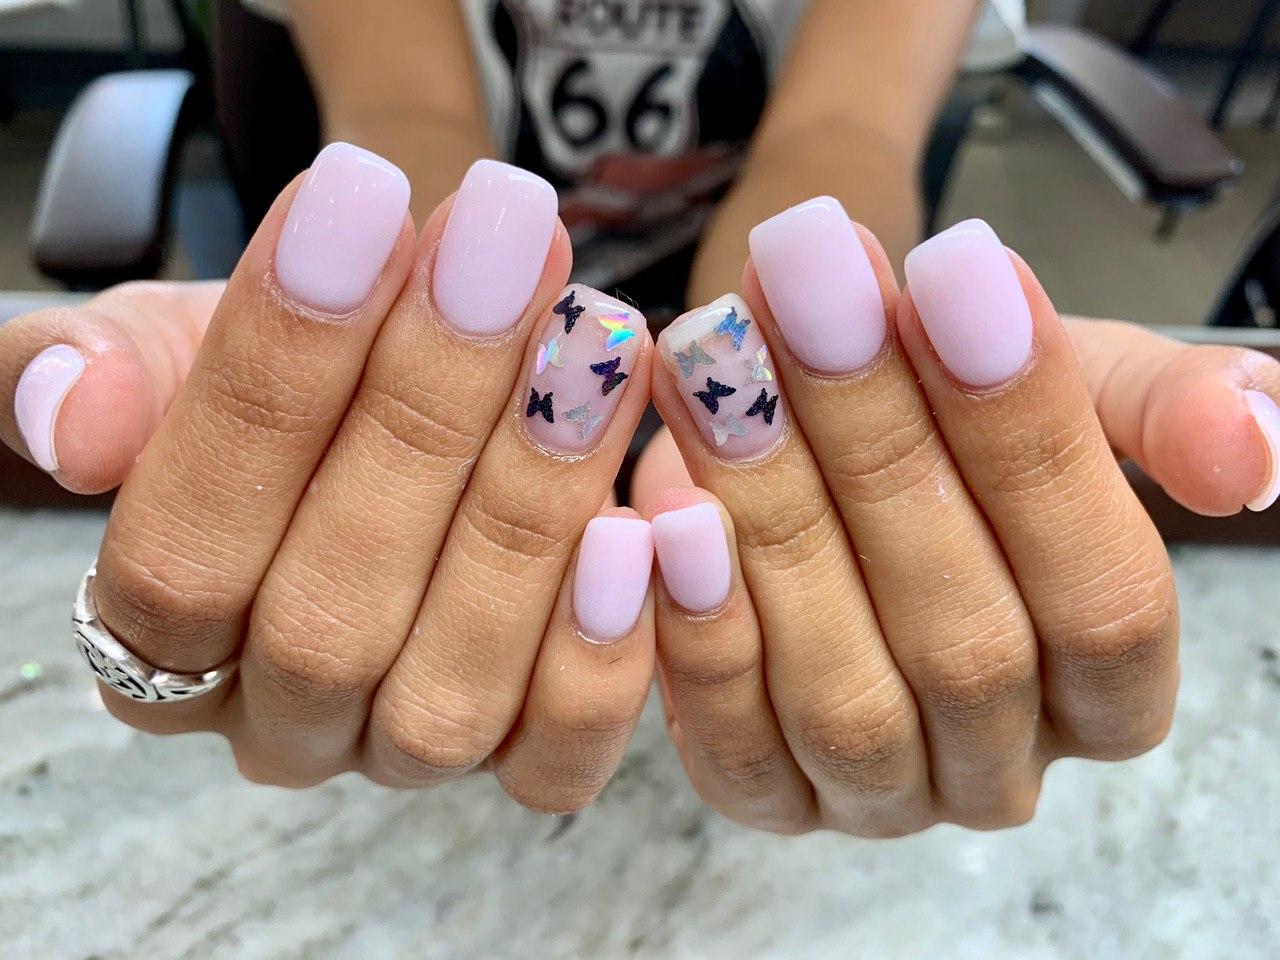 10. 25 Dip Powder Nail Designs That Will Make You Want to Try This Trend - wide 1